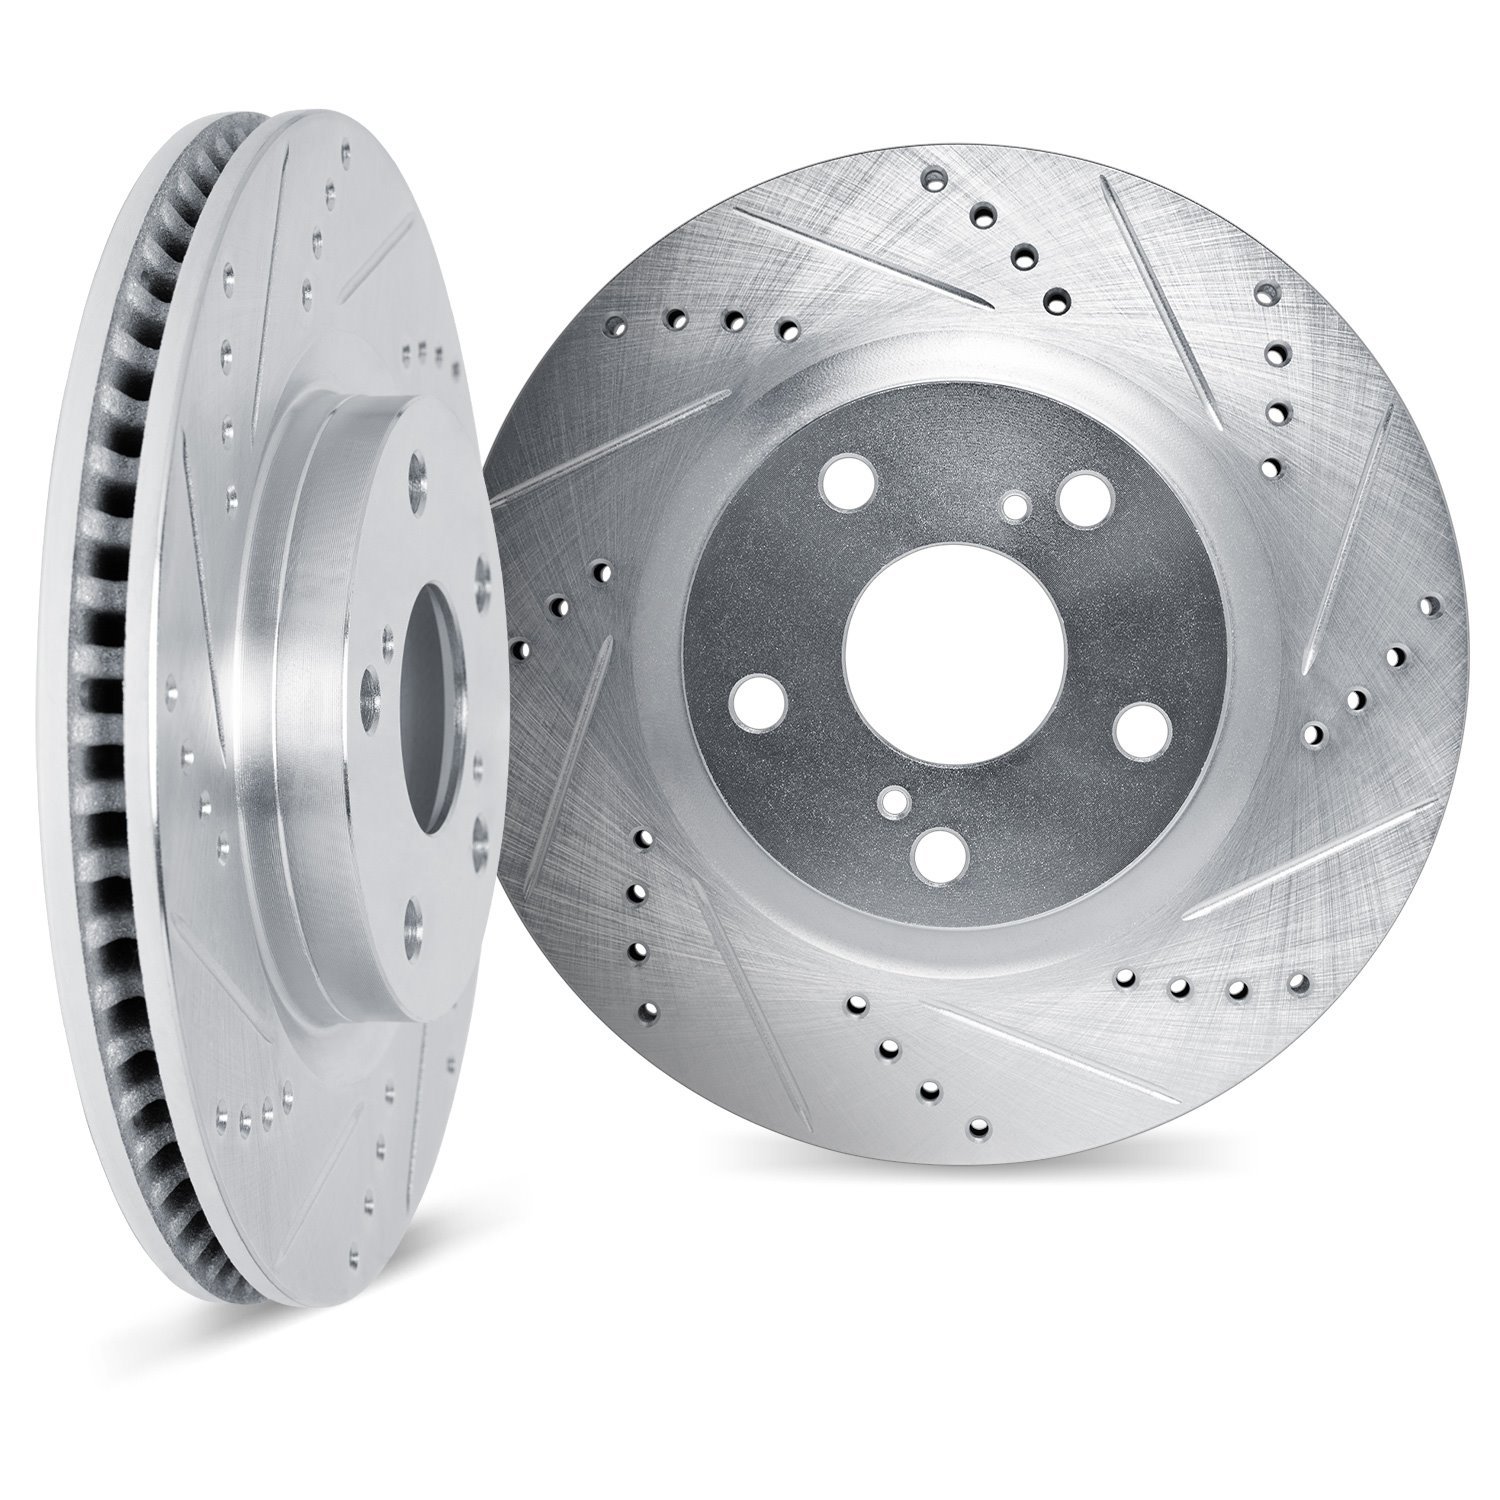 7002-74030 Drilled/Slotted Brake Rotors [Silver], 1998-1998 Audi/Volkswagen, Position: Front